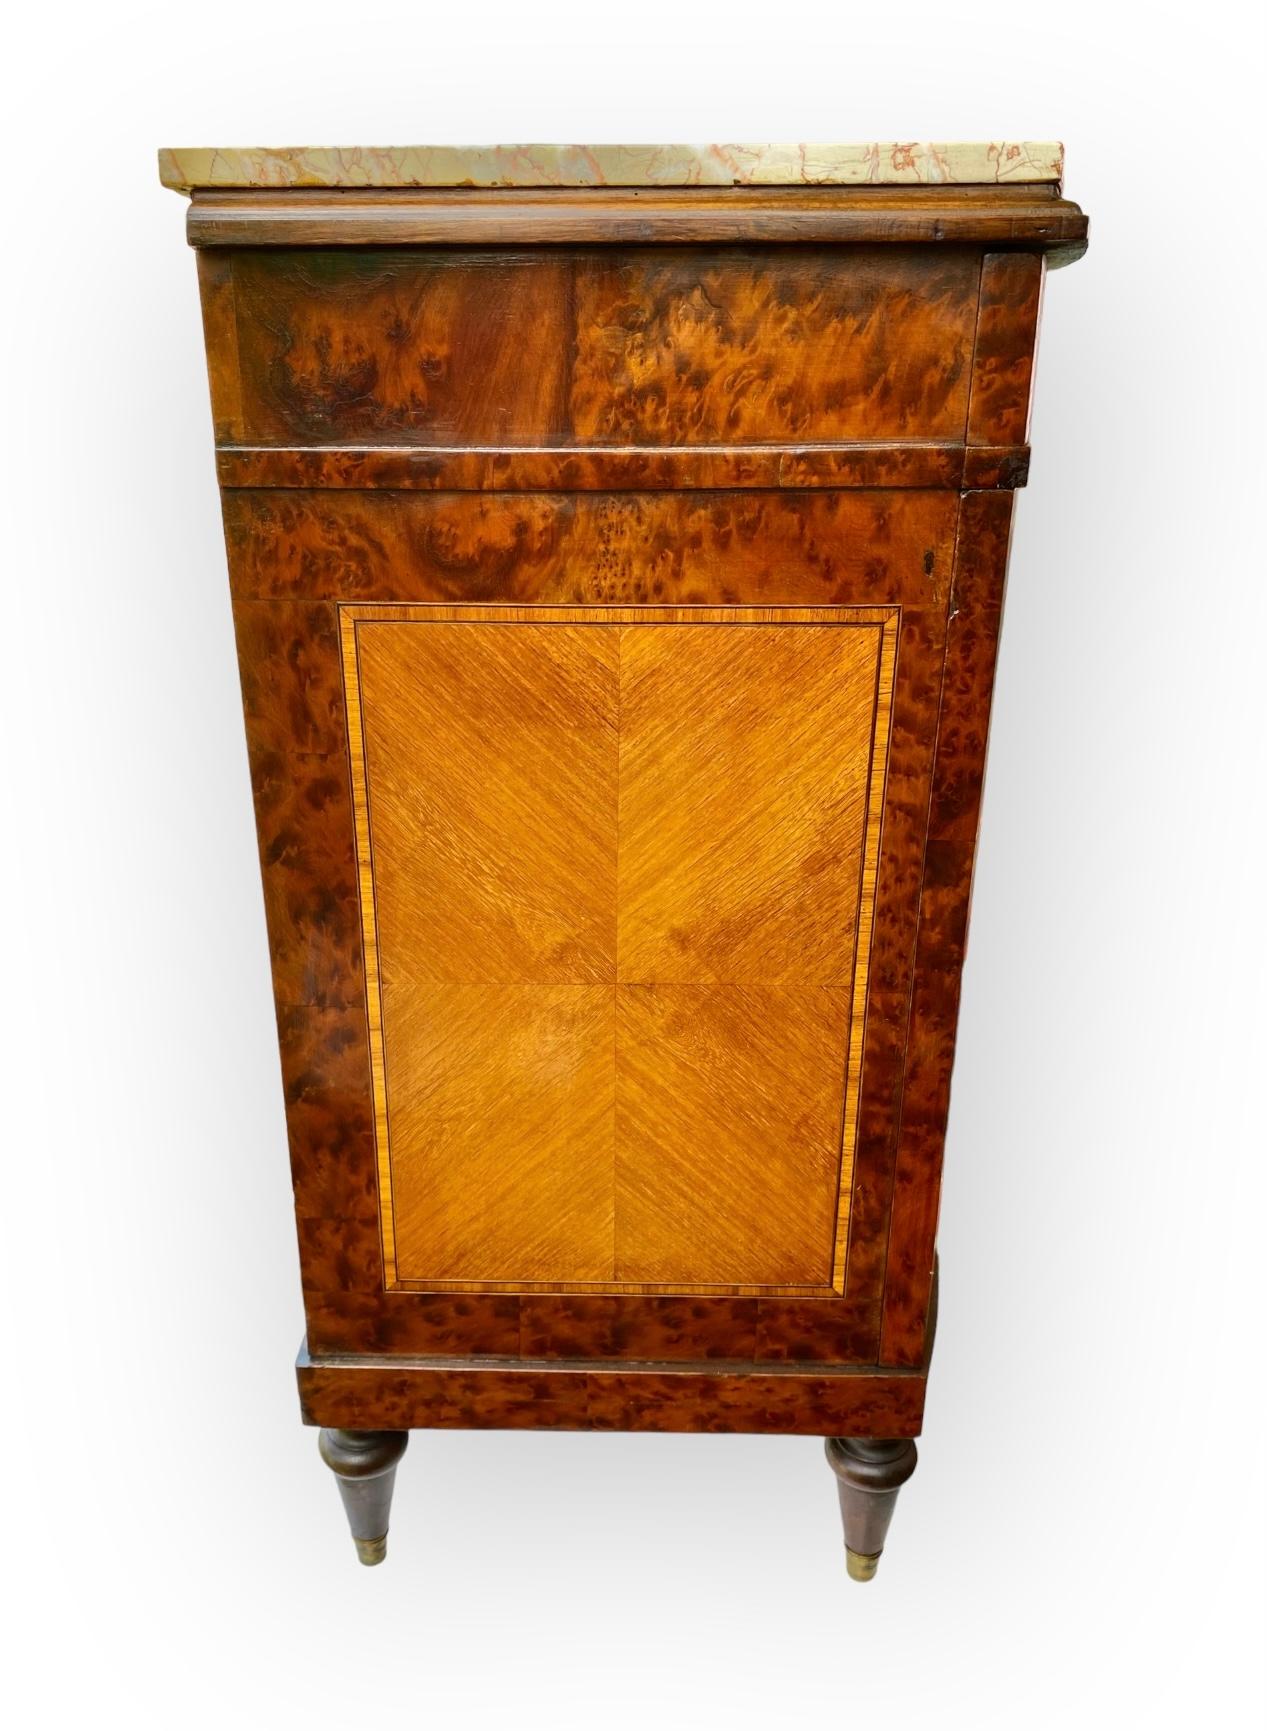 Bronze French Beaux Arts Inlaid Marquetry Burl Walnut Side Cabinet With Marble Tops  For Sale